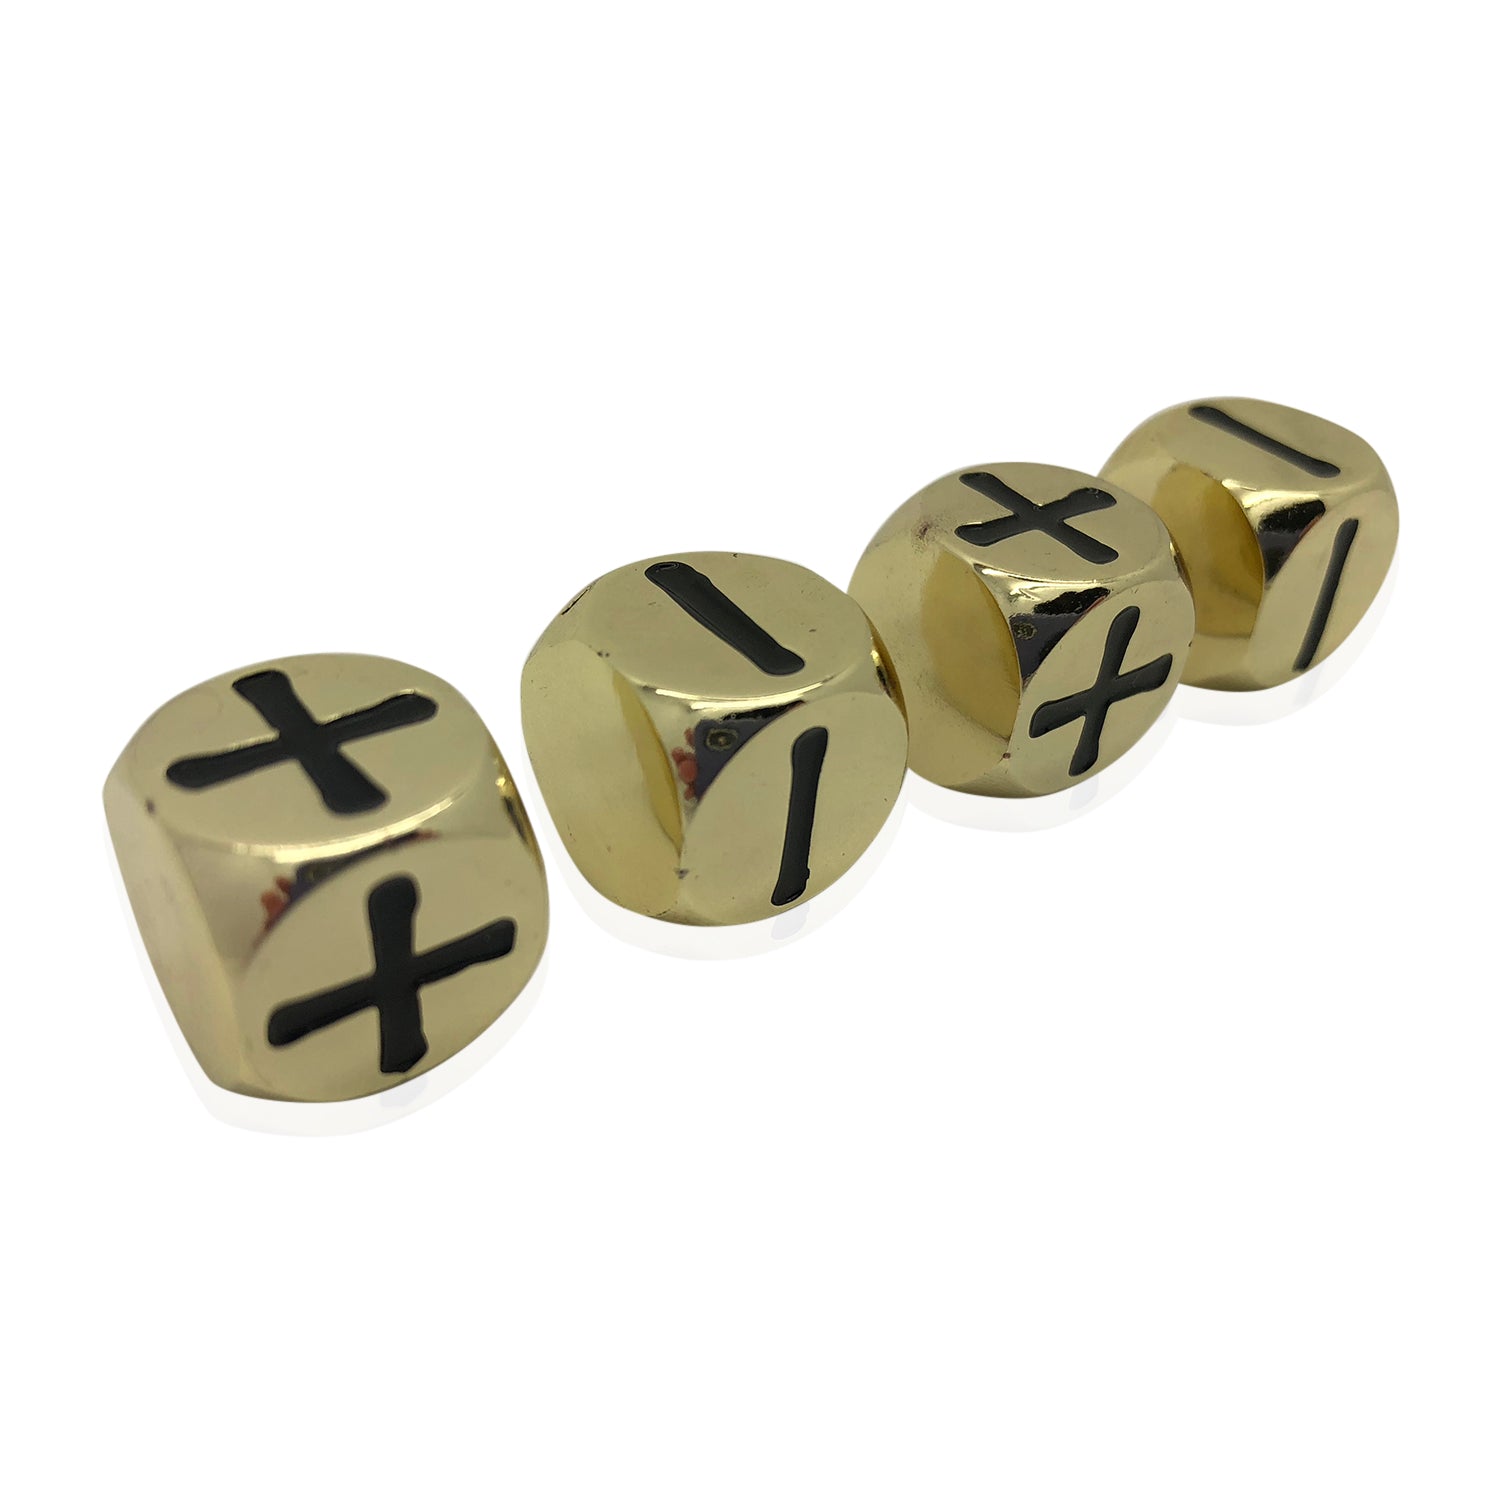 Fate Dice – Dead Man's Gold Pack of 4 Metal Dice